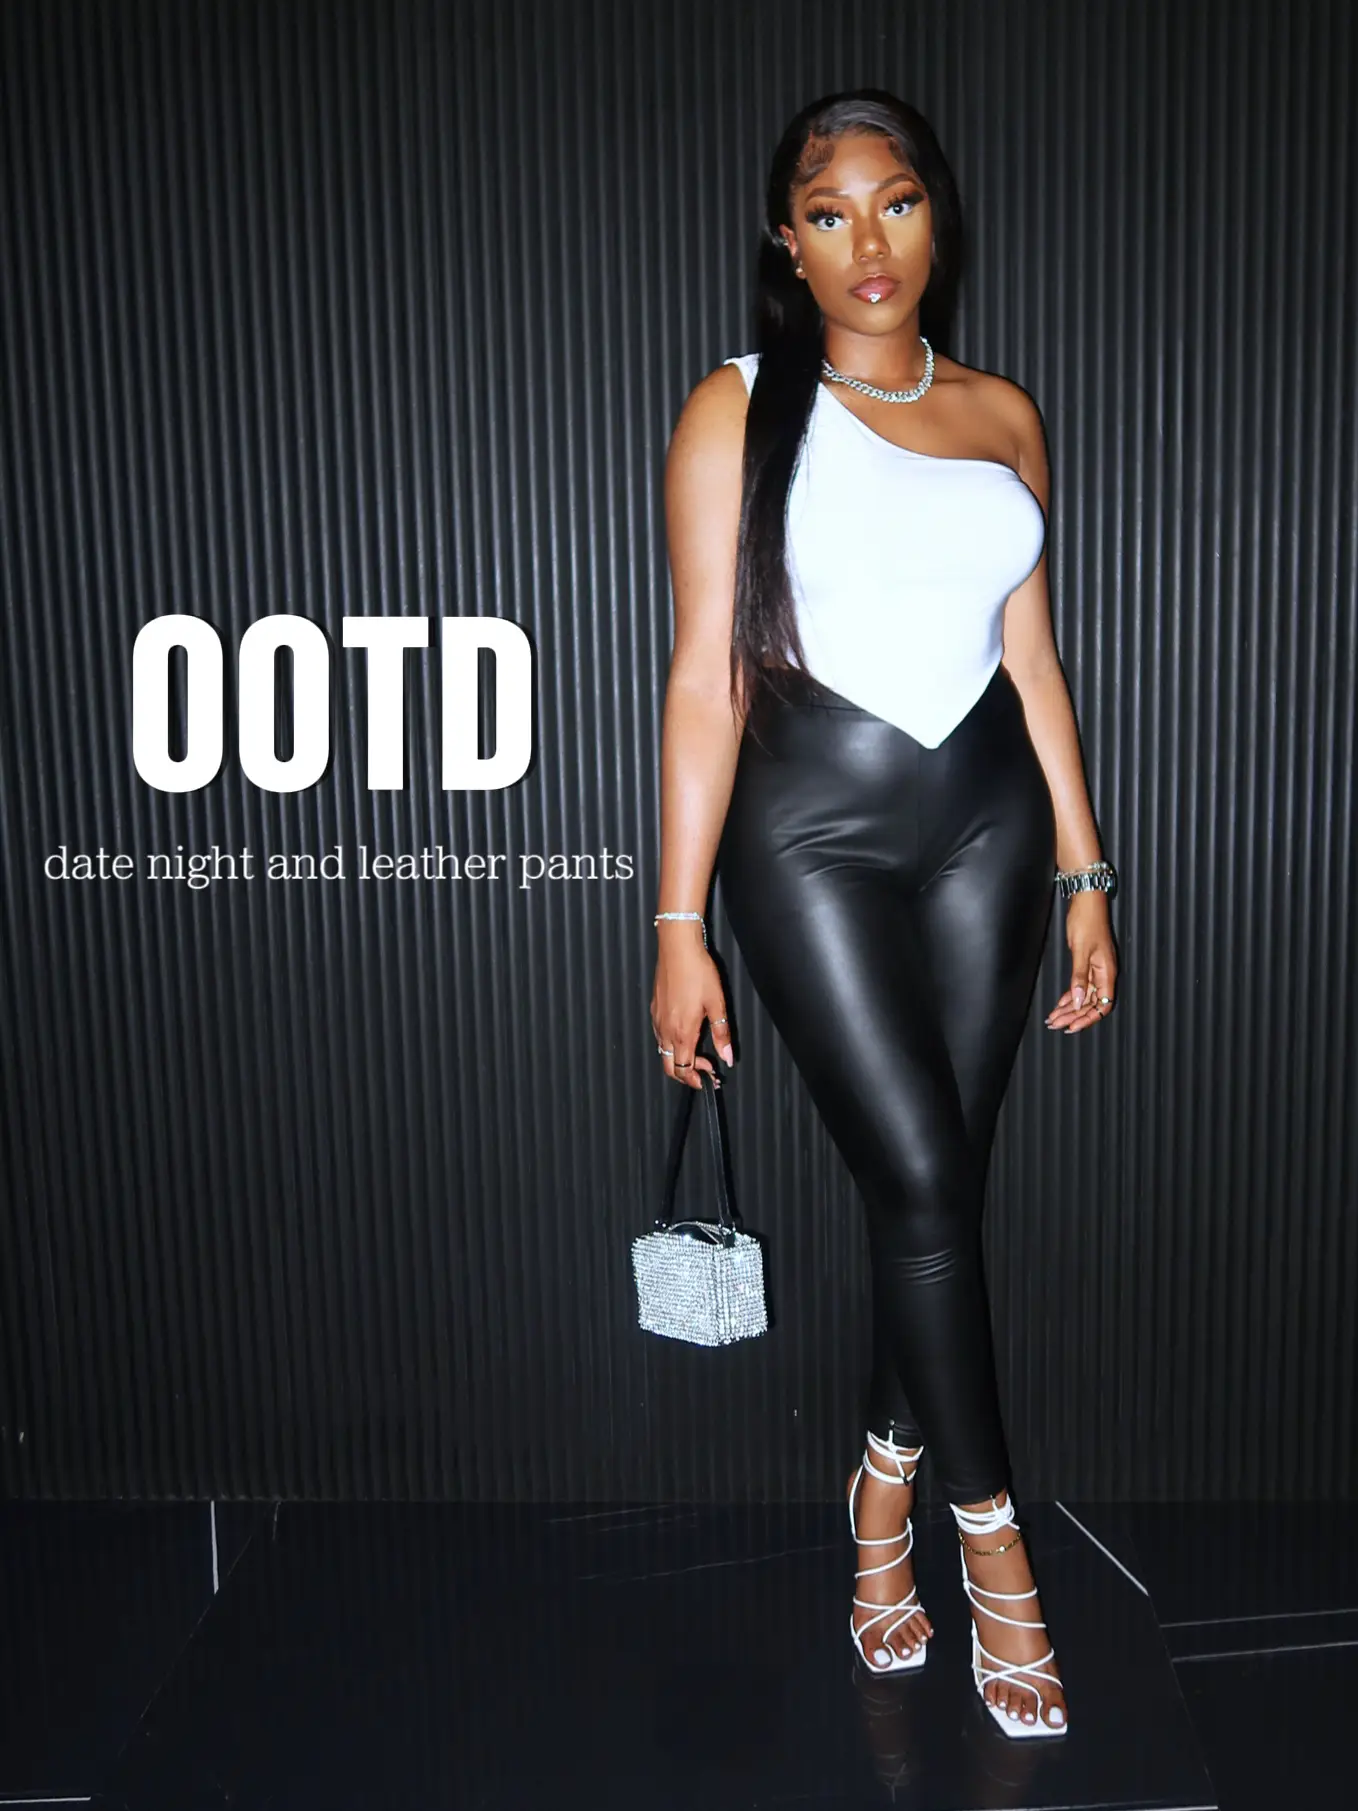 OOTD: date night and leather pants, Gallery posted by Zee Krystelle